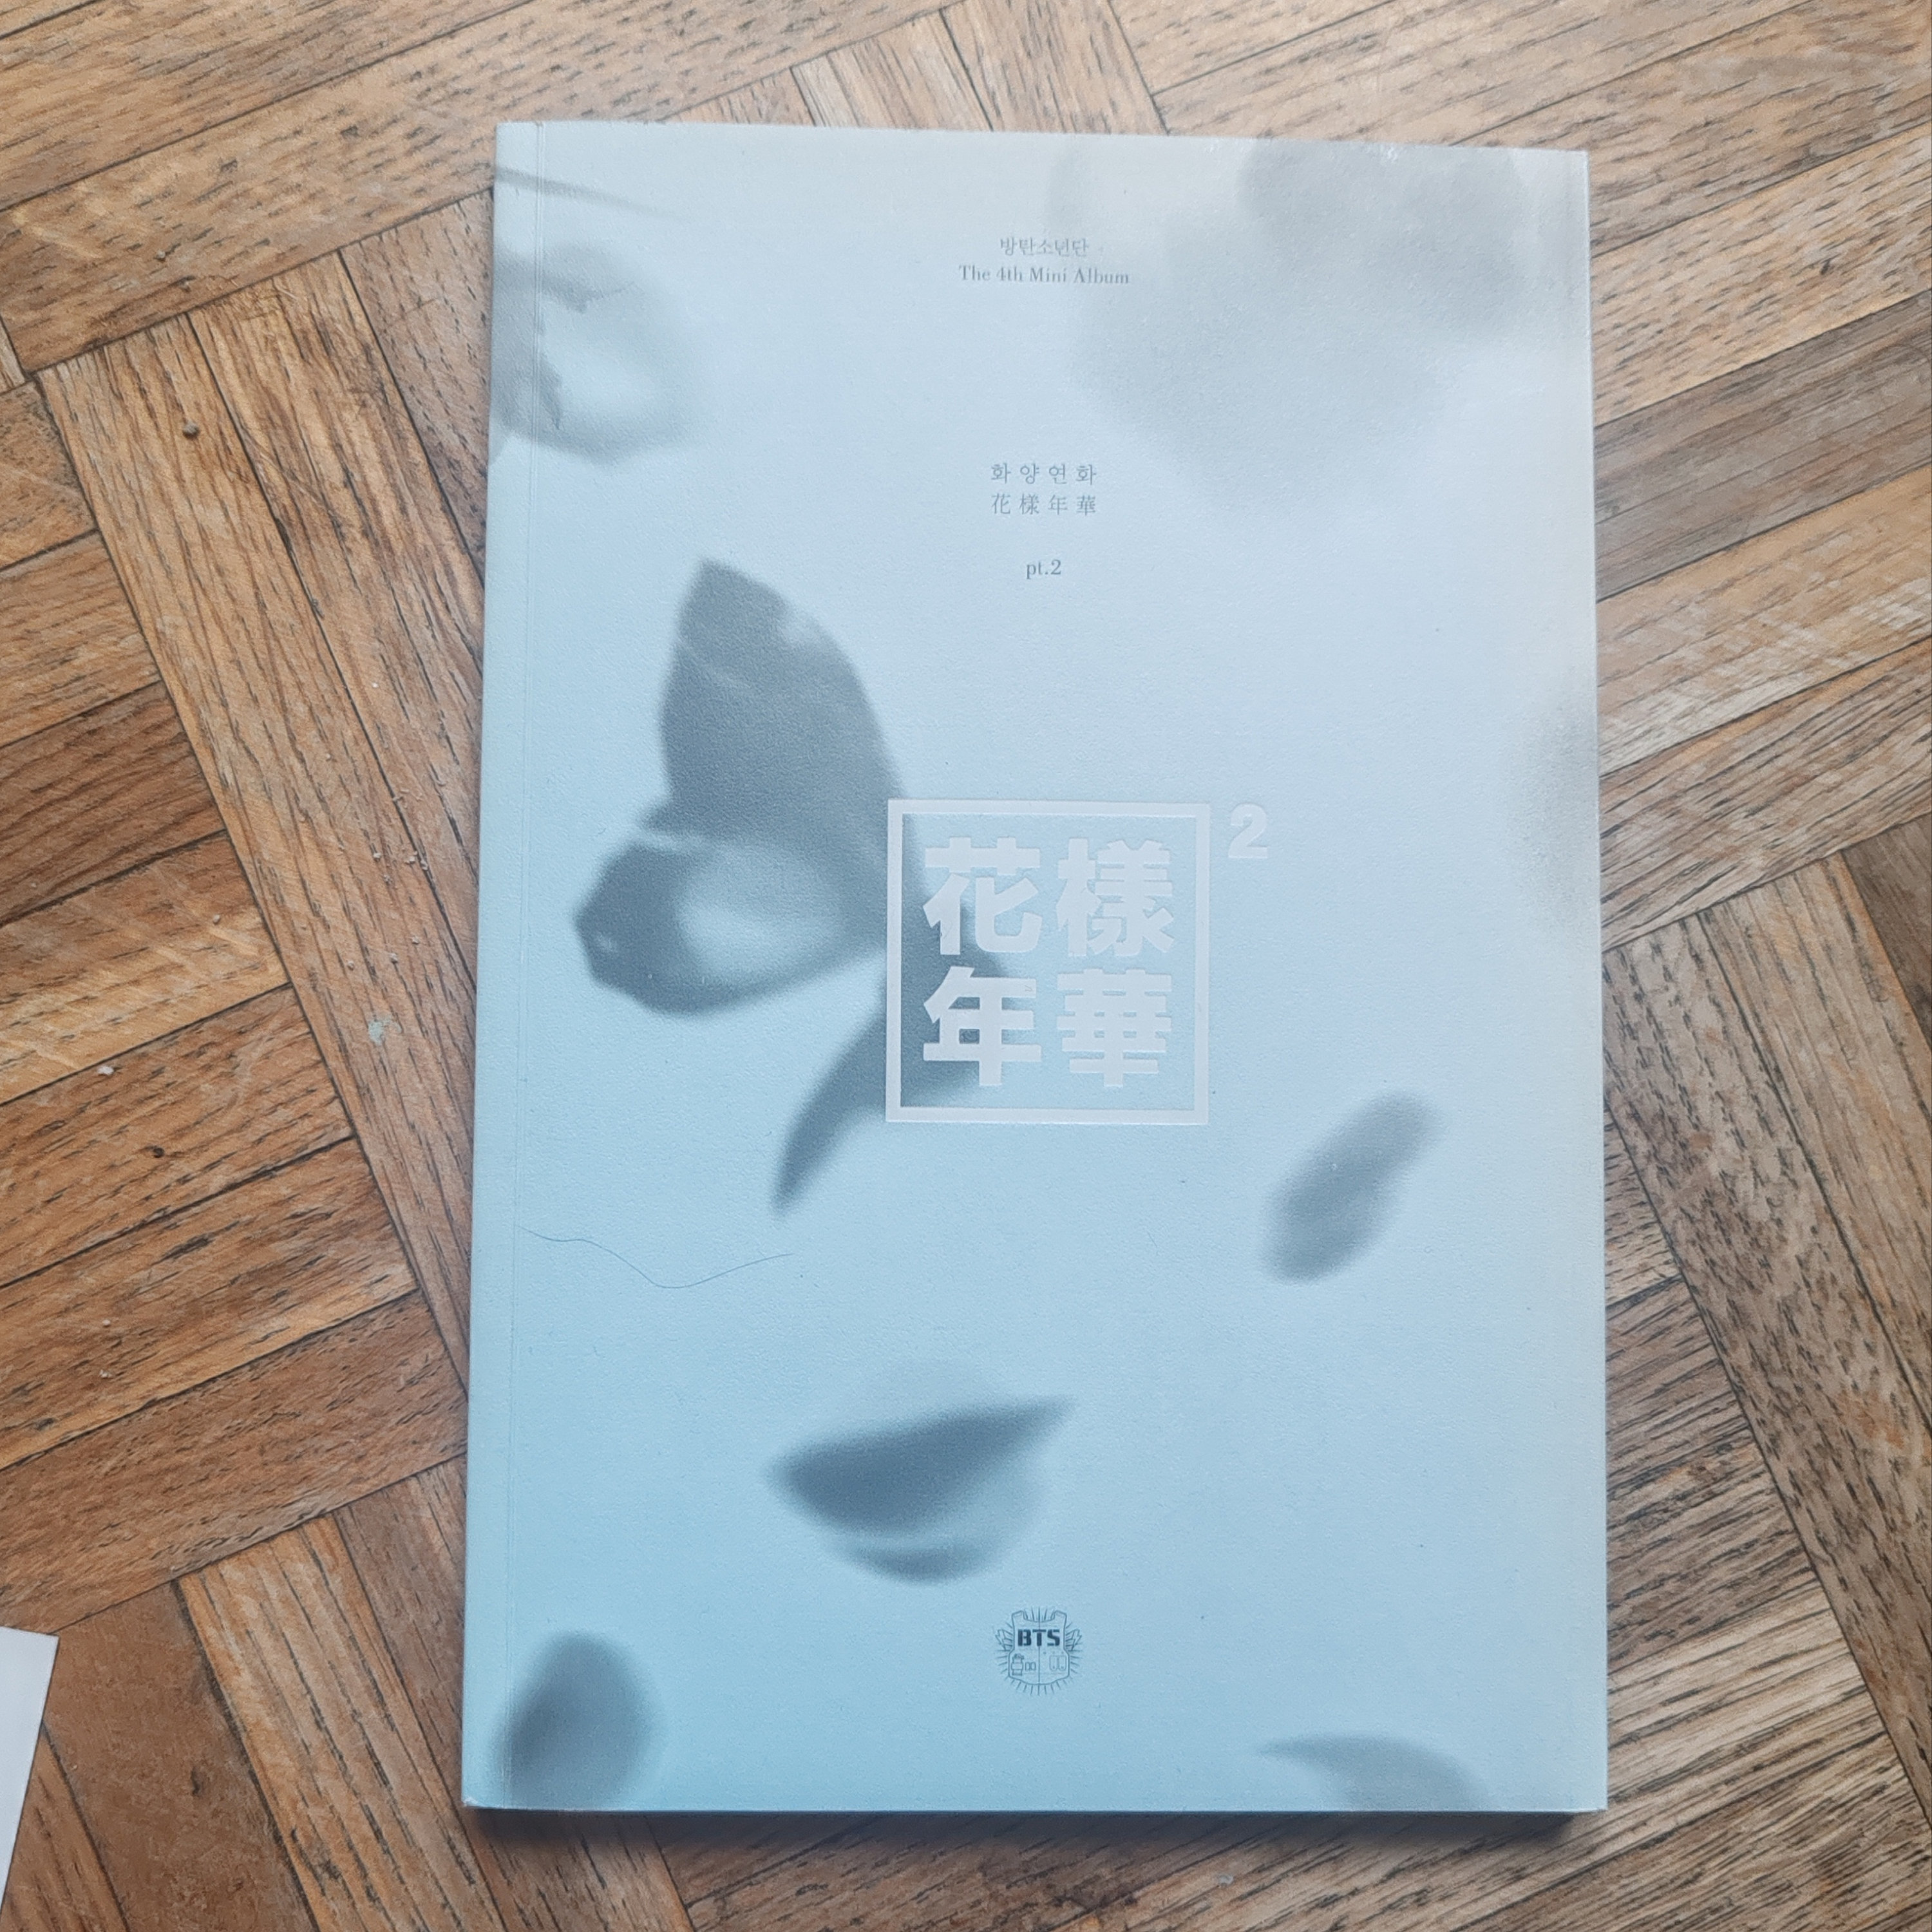  SSQIAN BTS Merchandise BTS Album Cover Acrylic Puzzle Standing  Display, Home, Desk, Bedroom Decor, Gift for Friends, Sisters, and  Colleague on Christmas/Birthday : Home & Kitchen